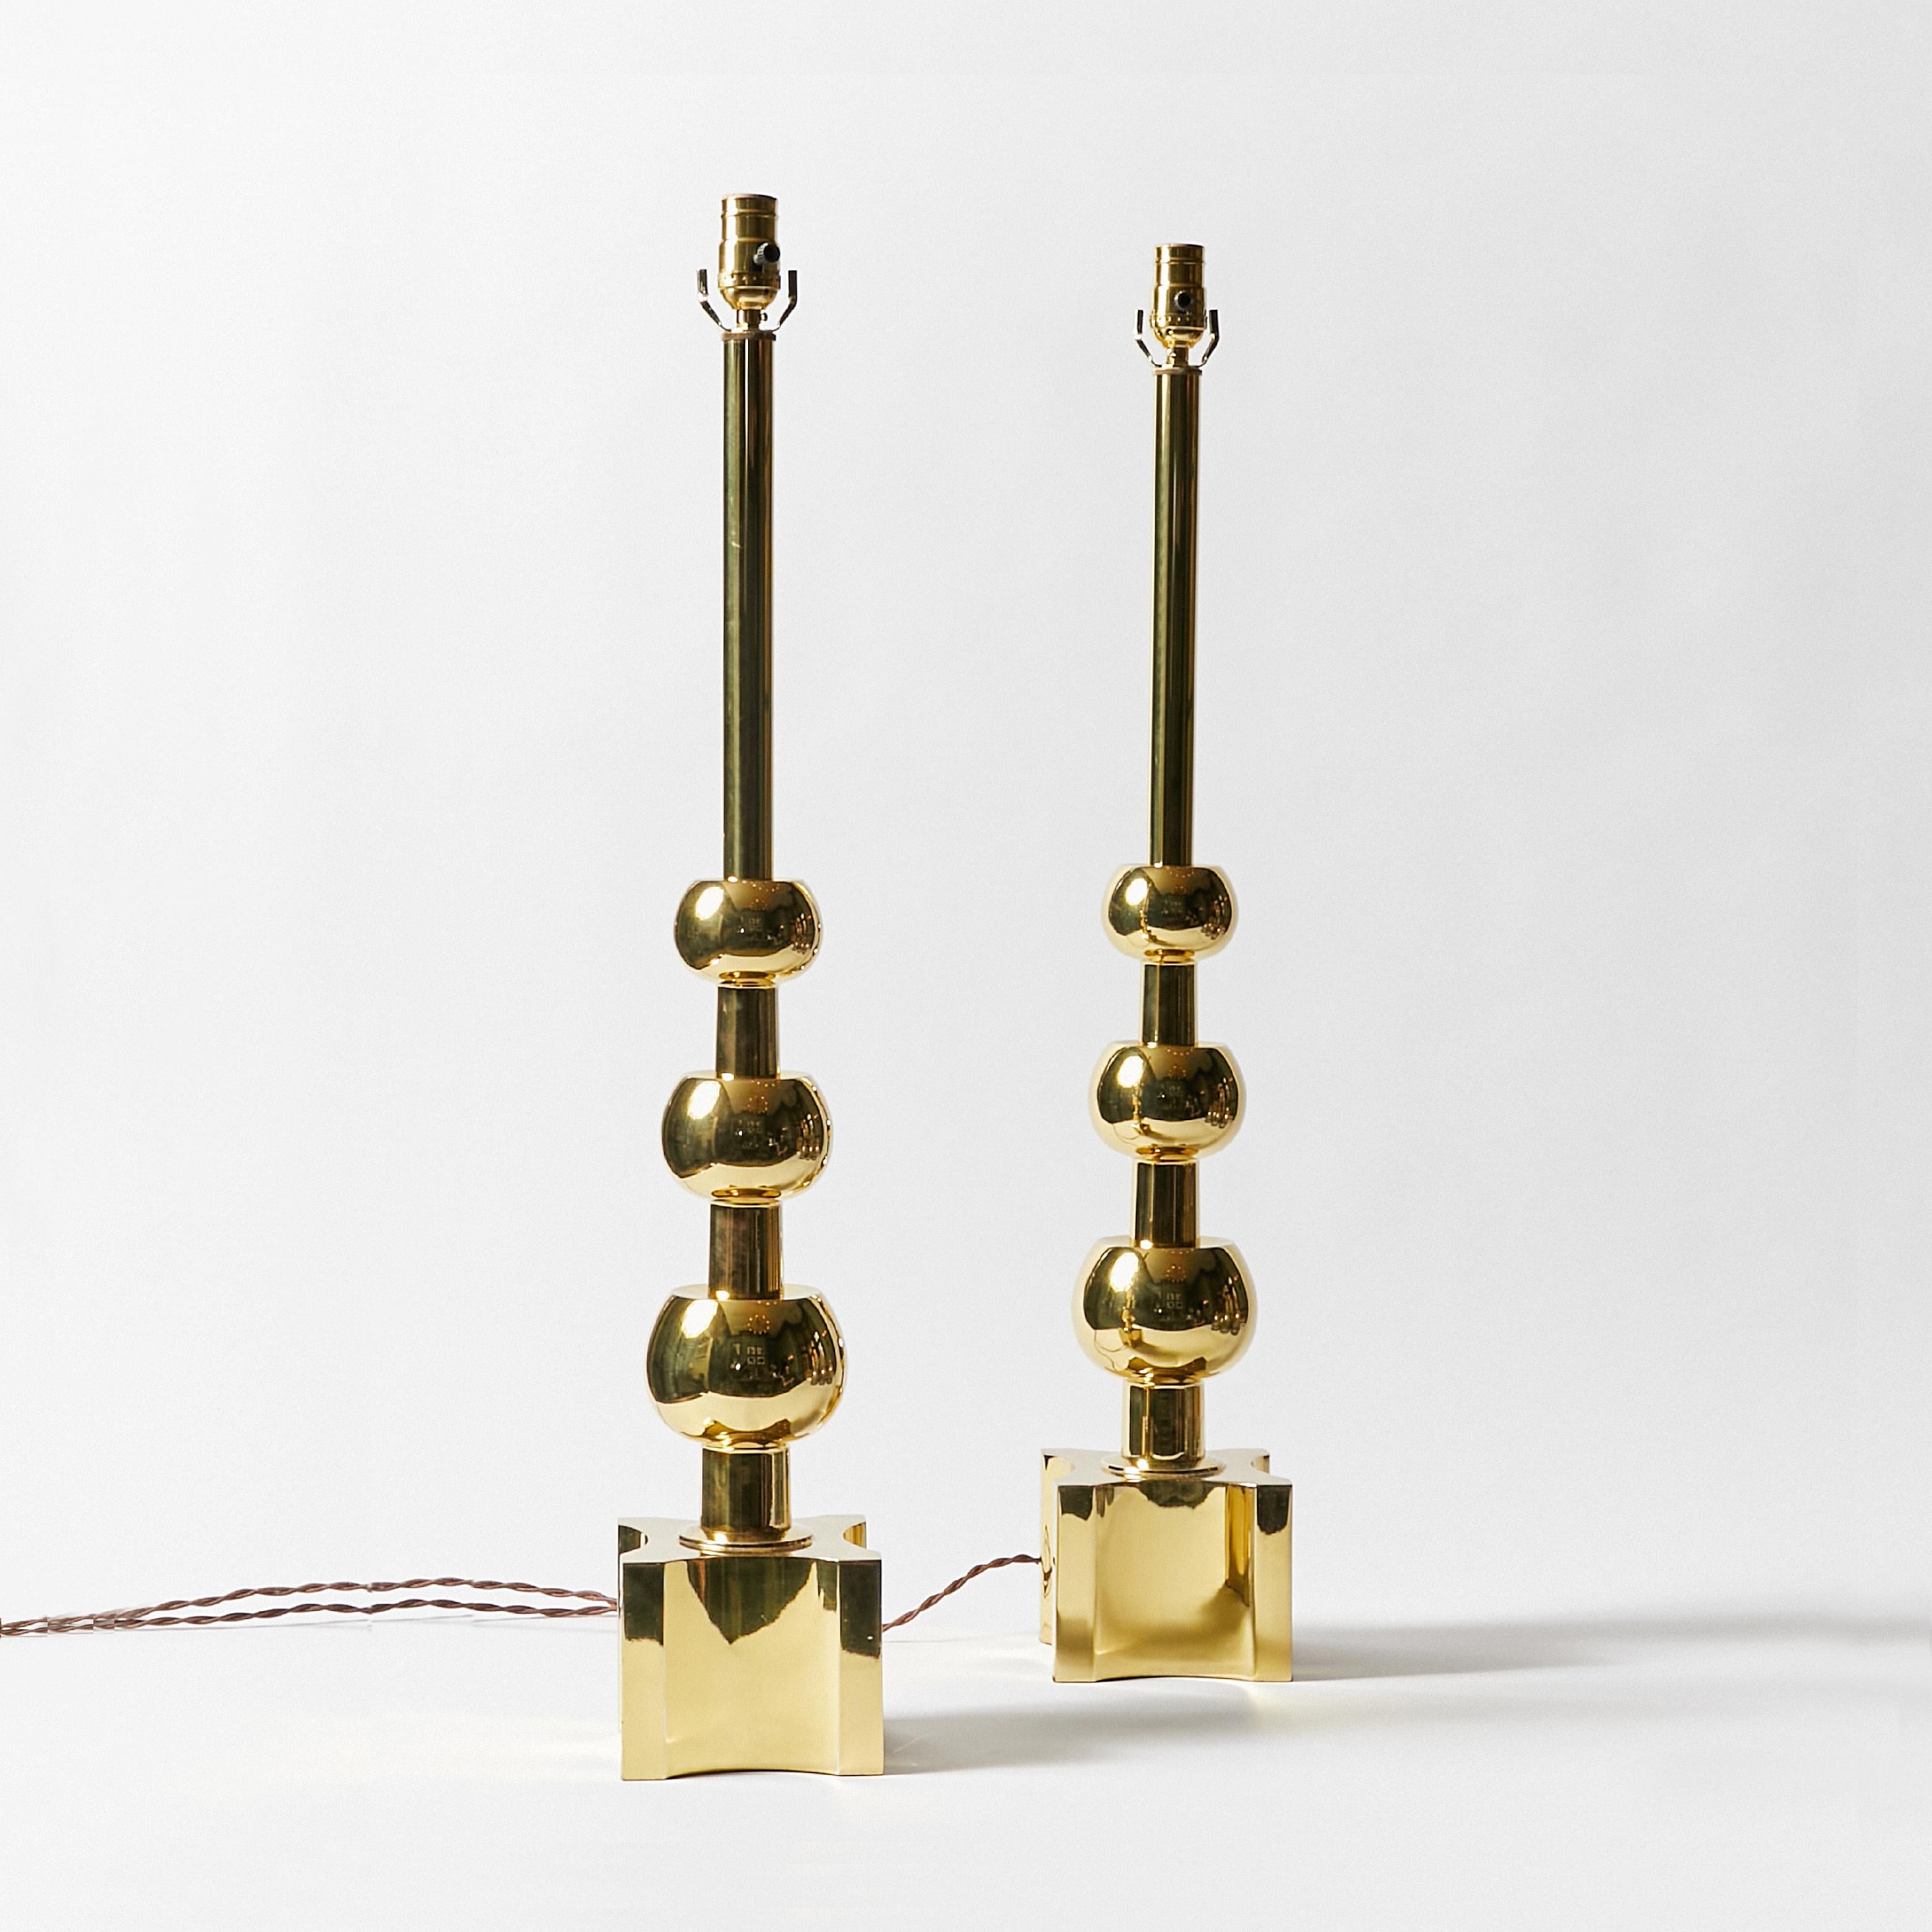 Set of two brass ball lamps mid-century modern by Tommi Parzinger for Stiffel Lamp Co. This item has been rewired with braided cloth cord and new hardware. This lamp does not include shade or harp.